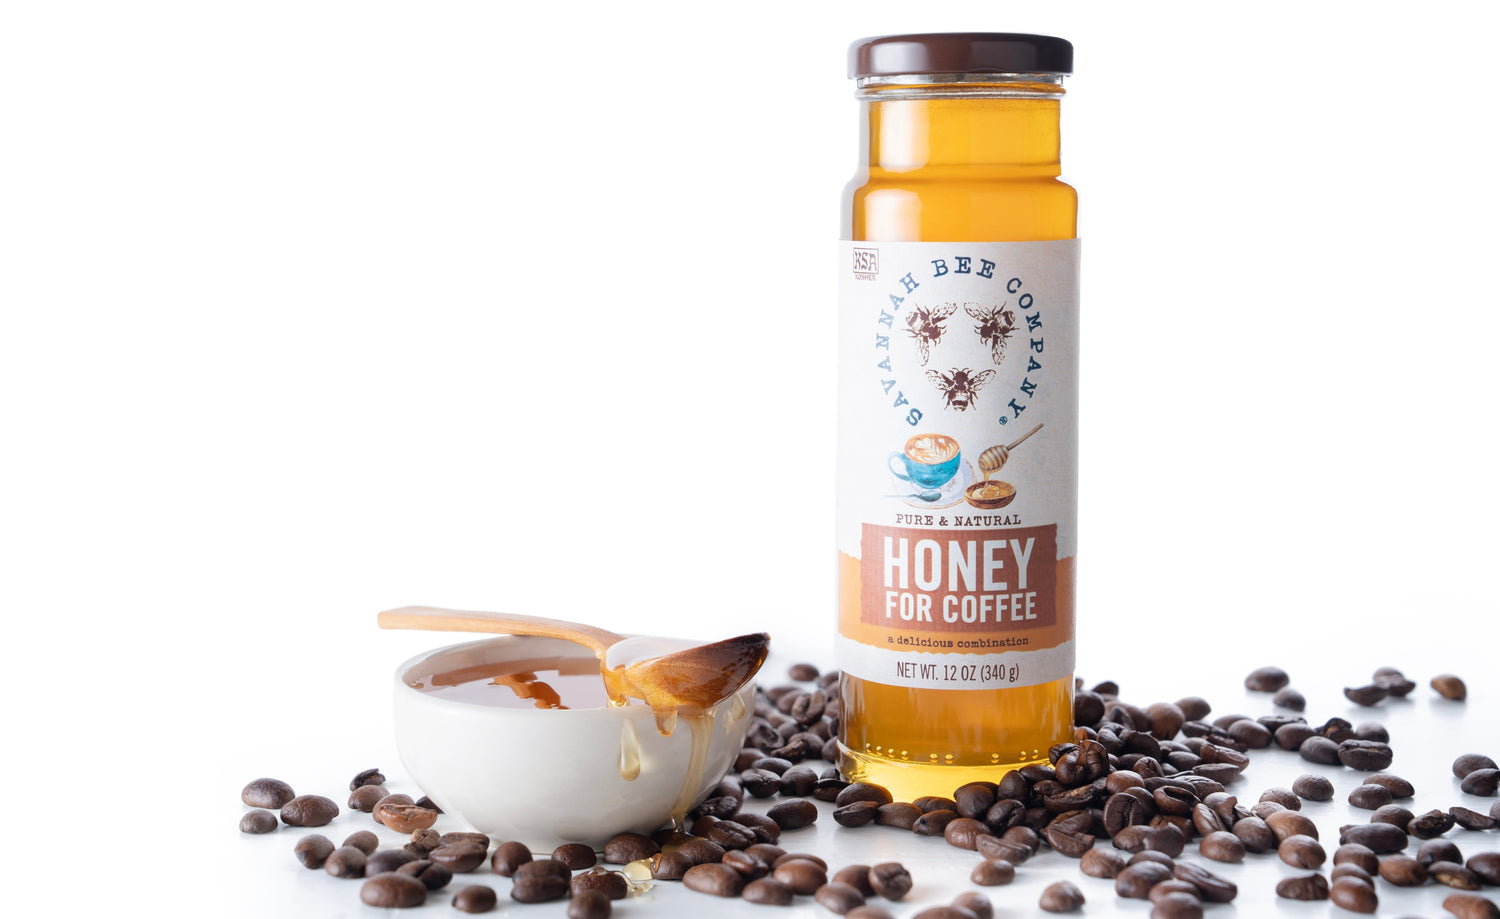 Honey for Coffee surround by coffee beans with a dish of honey on the left side